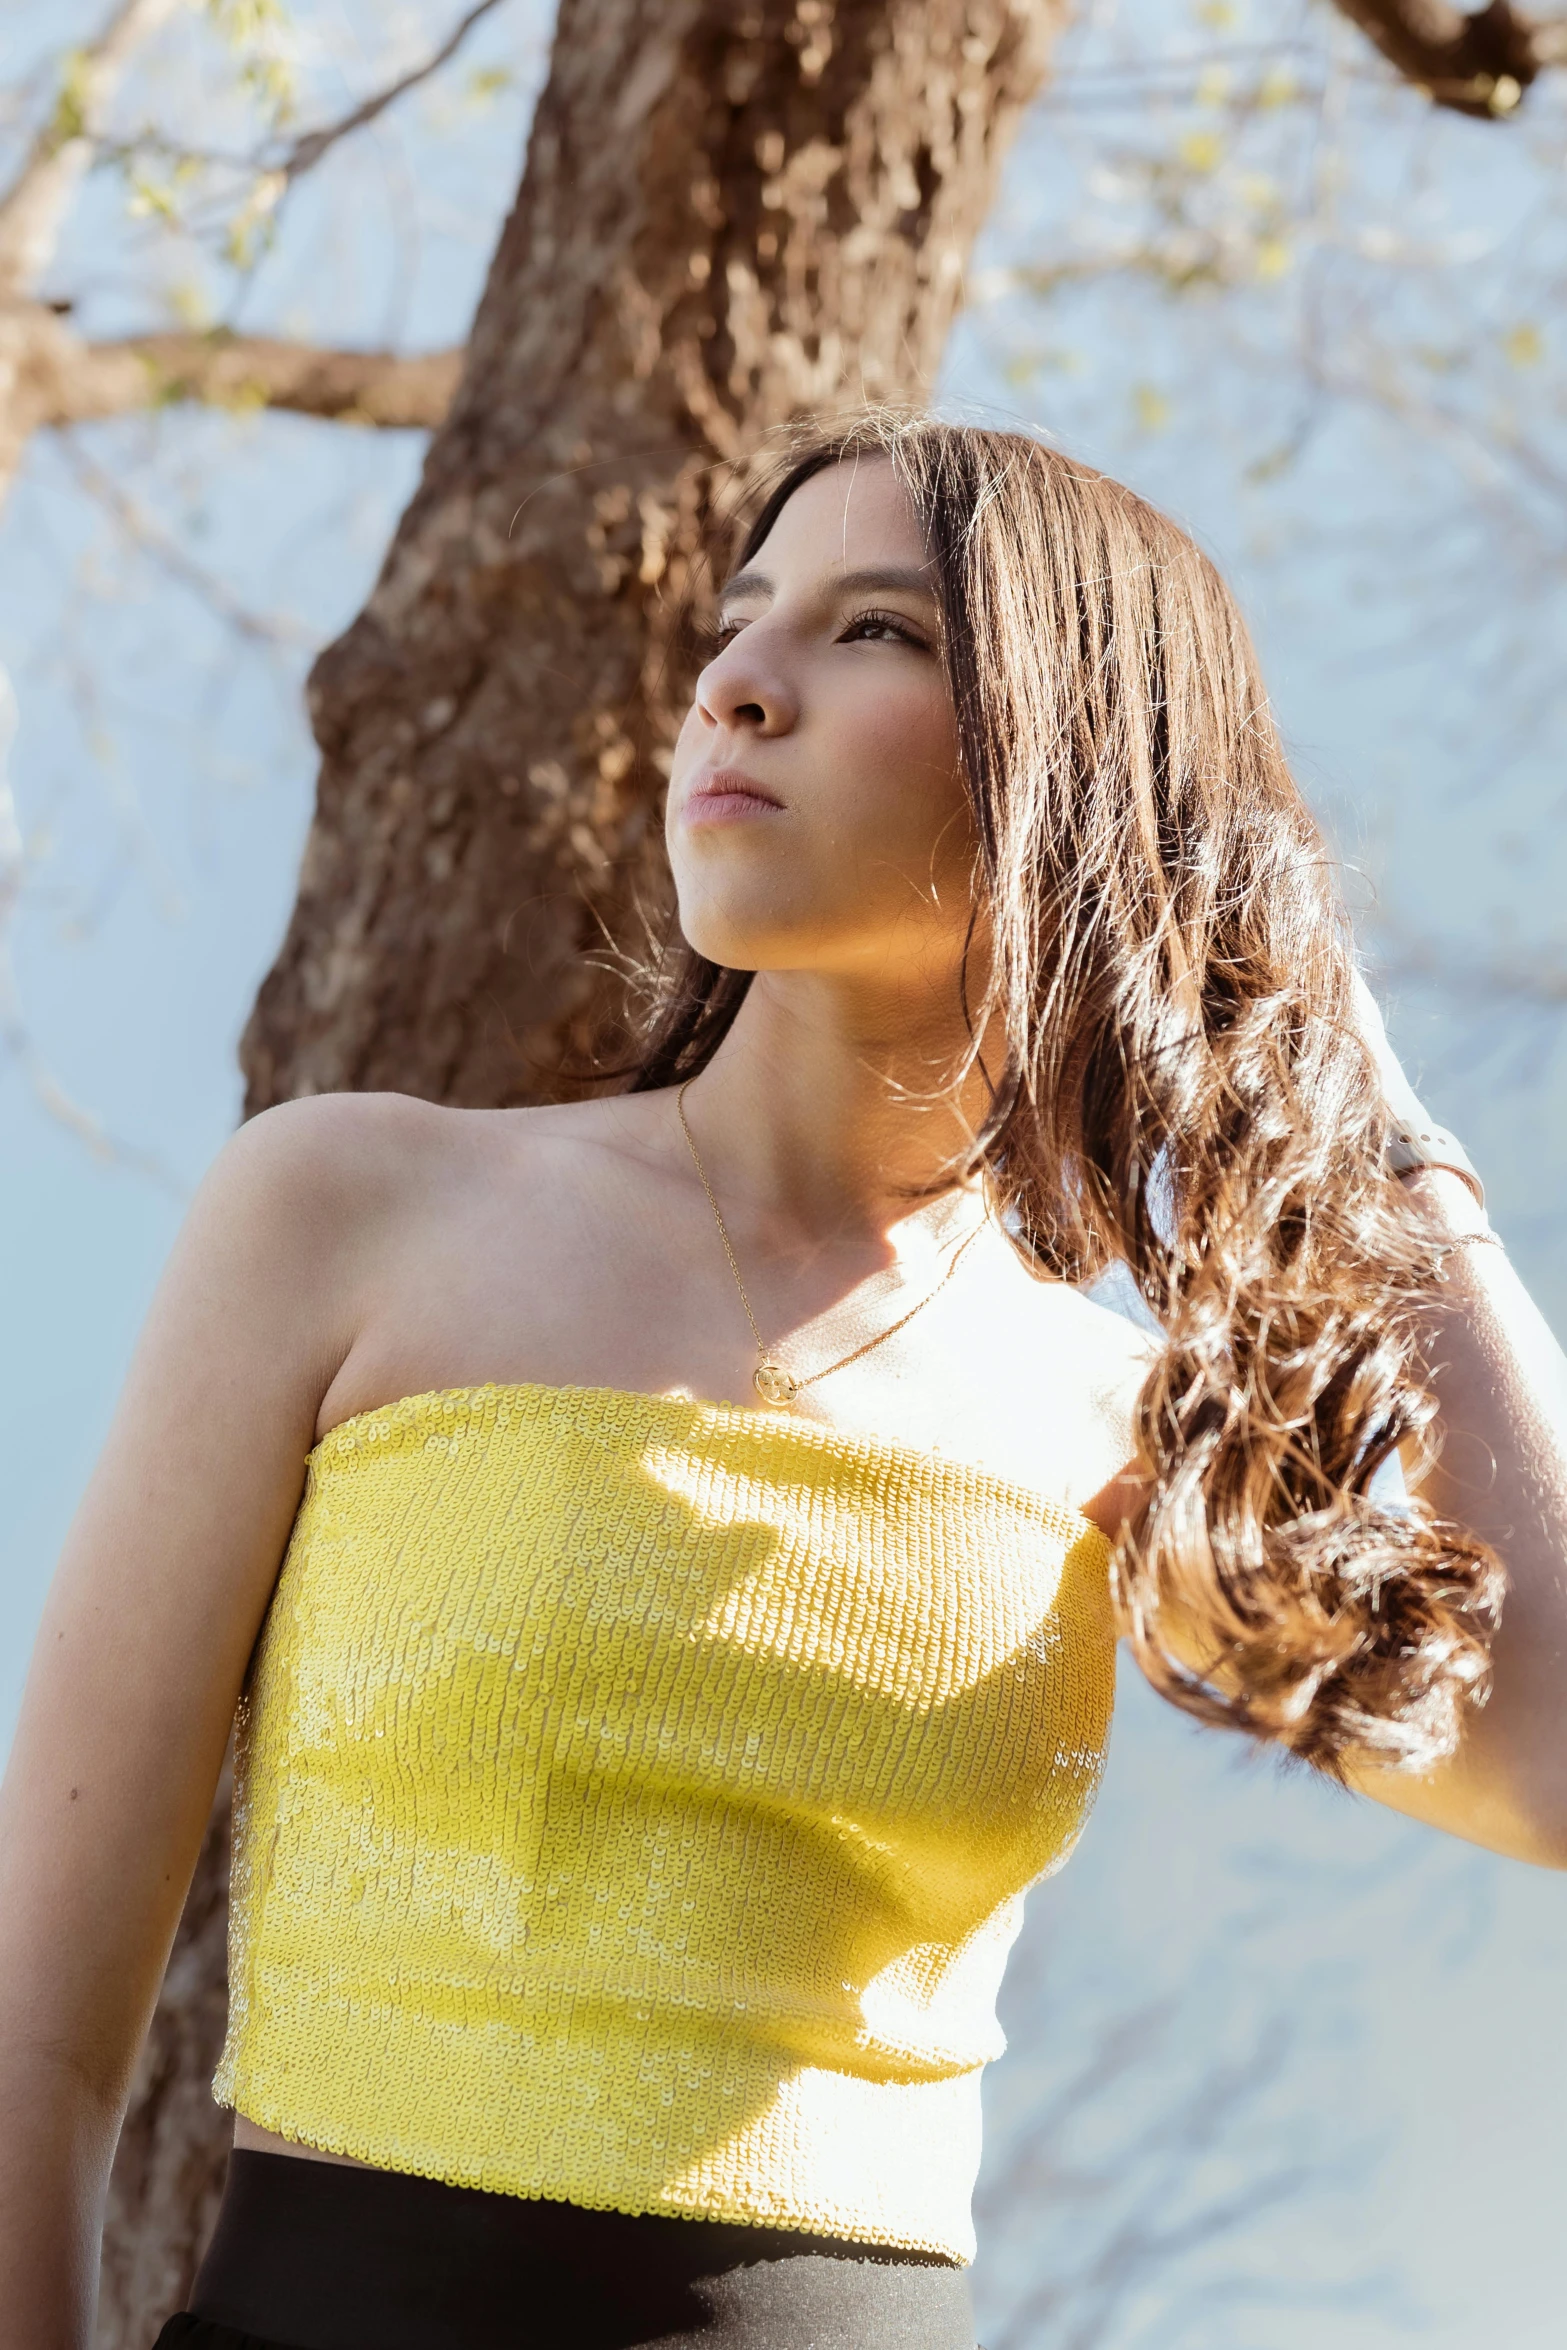 a woman with brown hair, in front of a tree, is wearing a yellow top